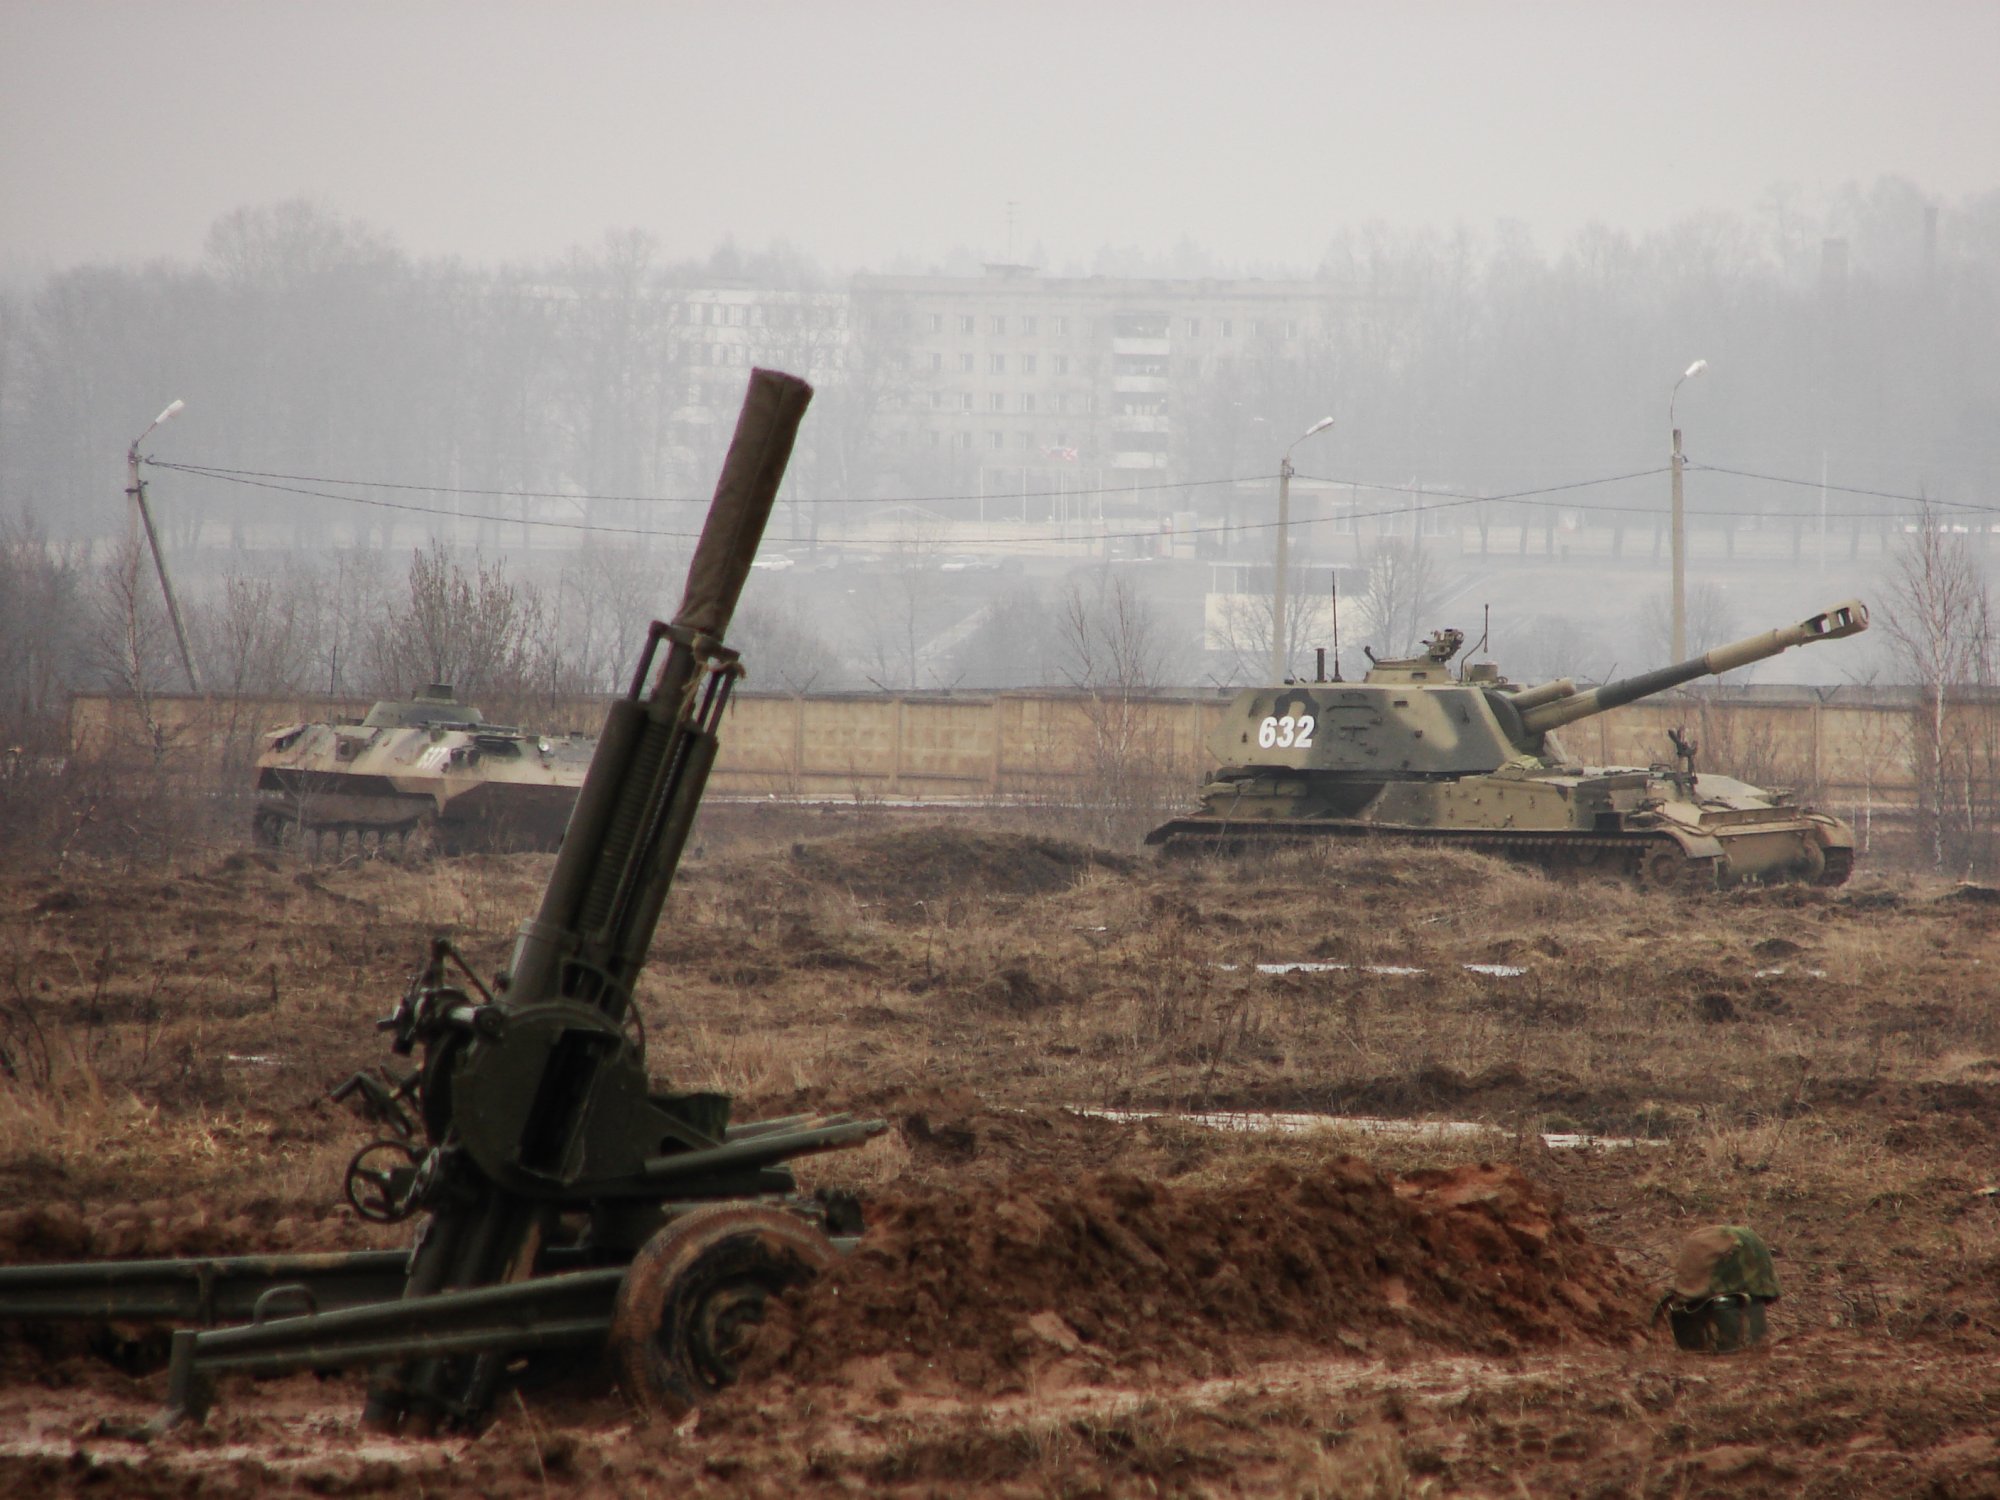 Ukrainian fighters subjected to mortar fire suburbs of Donetsk